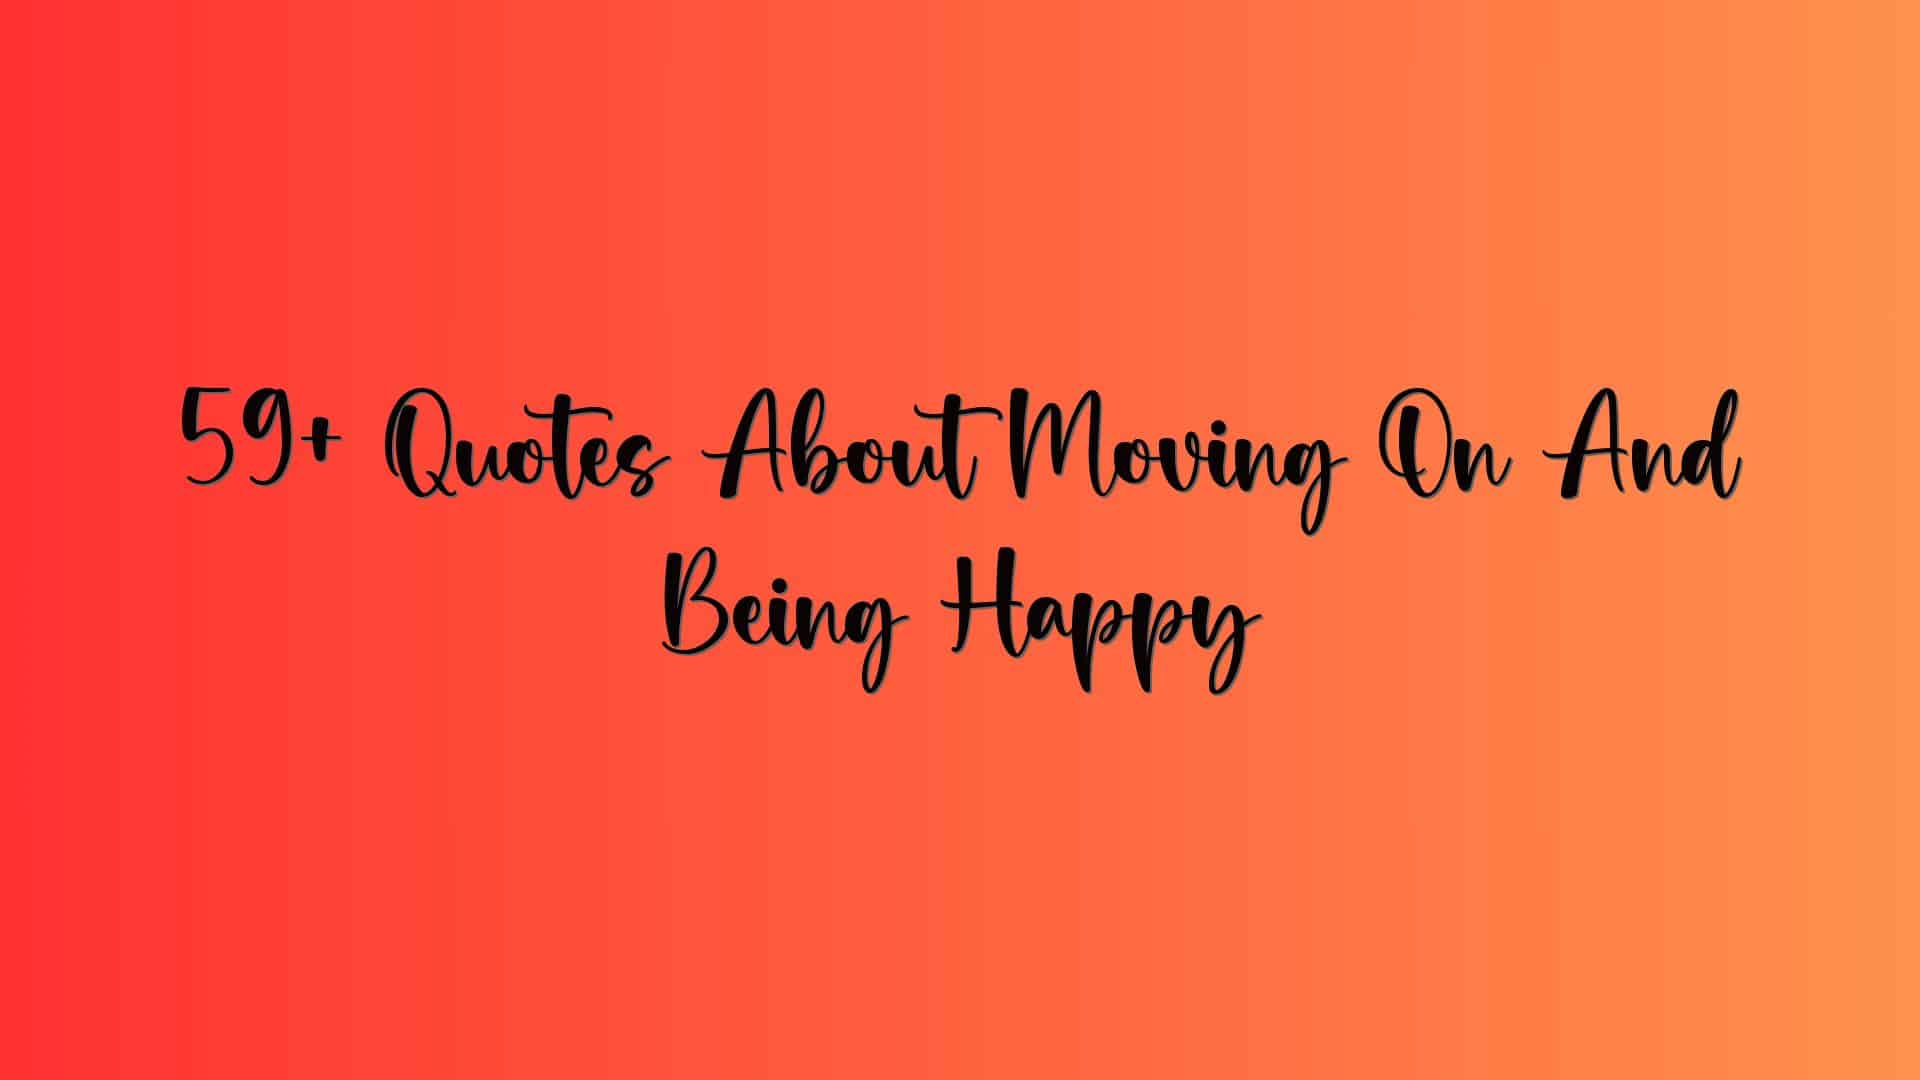 59+ Quotes About Moving On And Being Happy